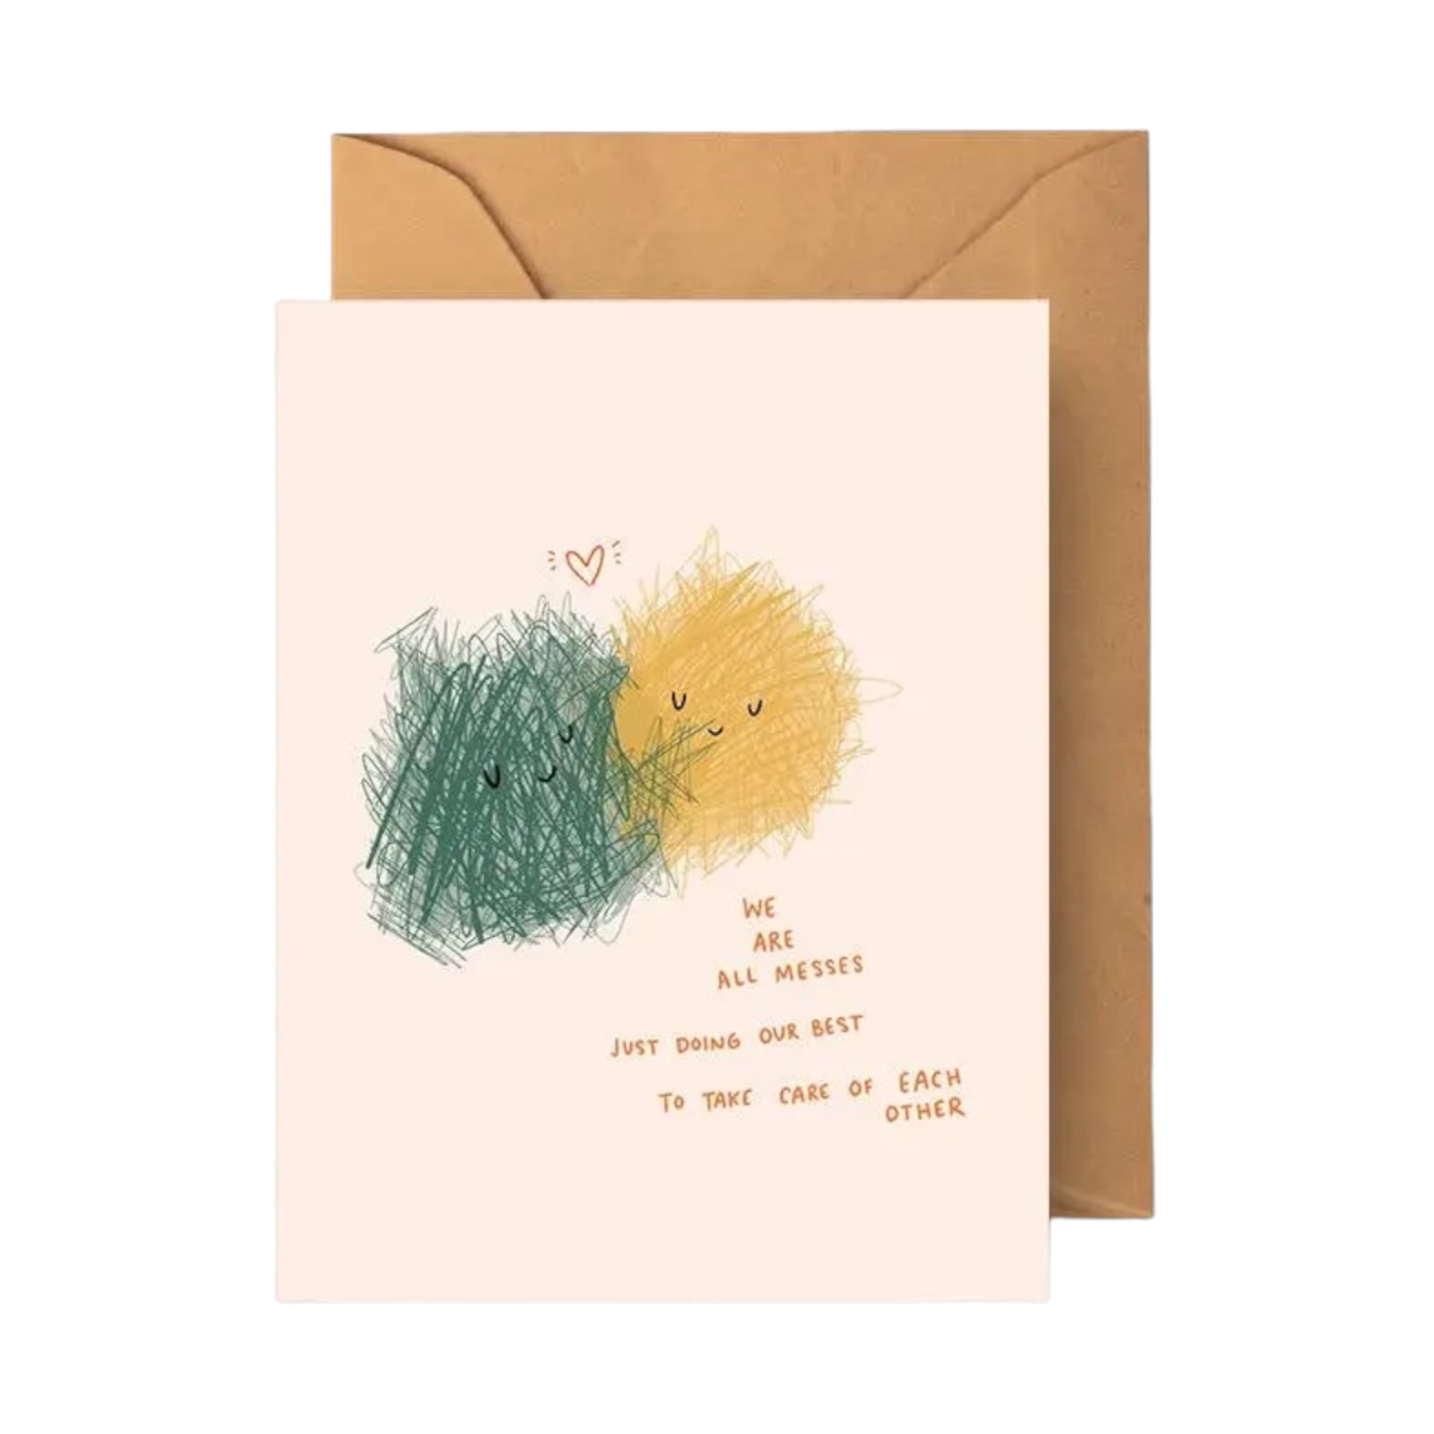 We're All Messes Card by Abbie Wren